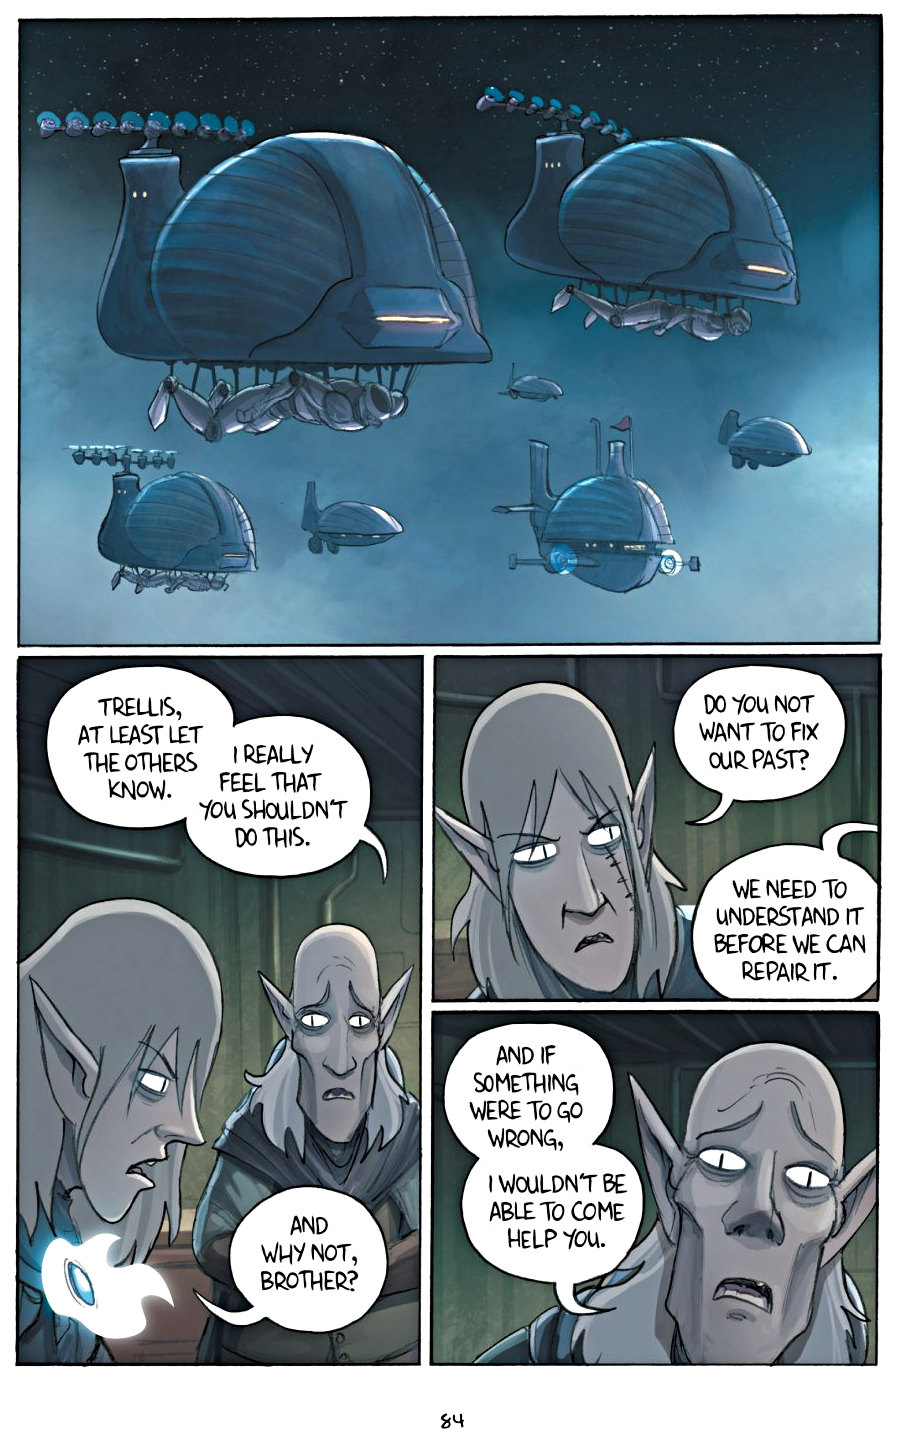 page 84 of amulet 5 prince of the elves graphic novel